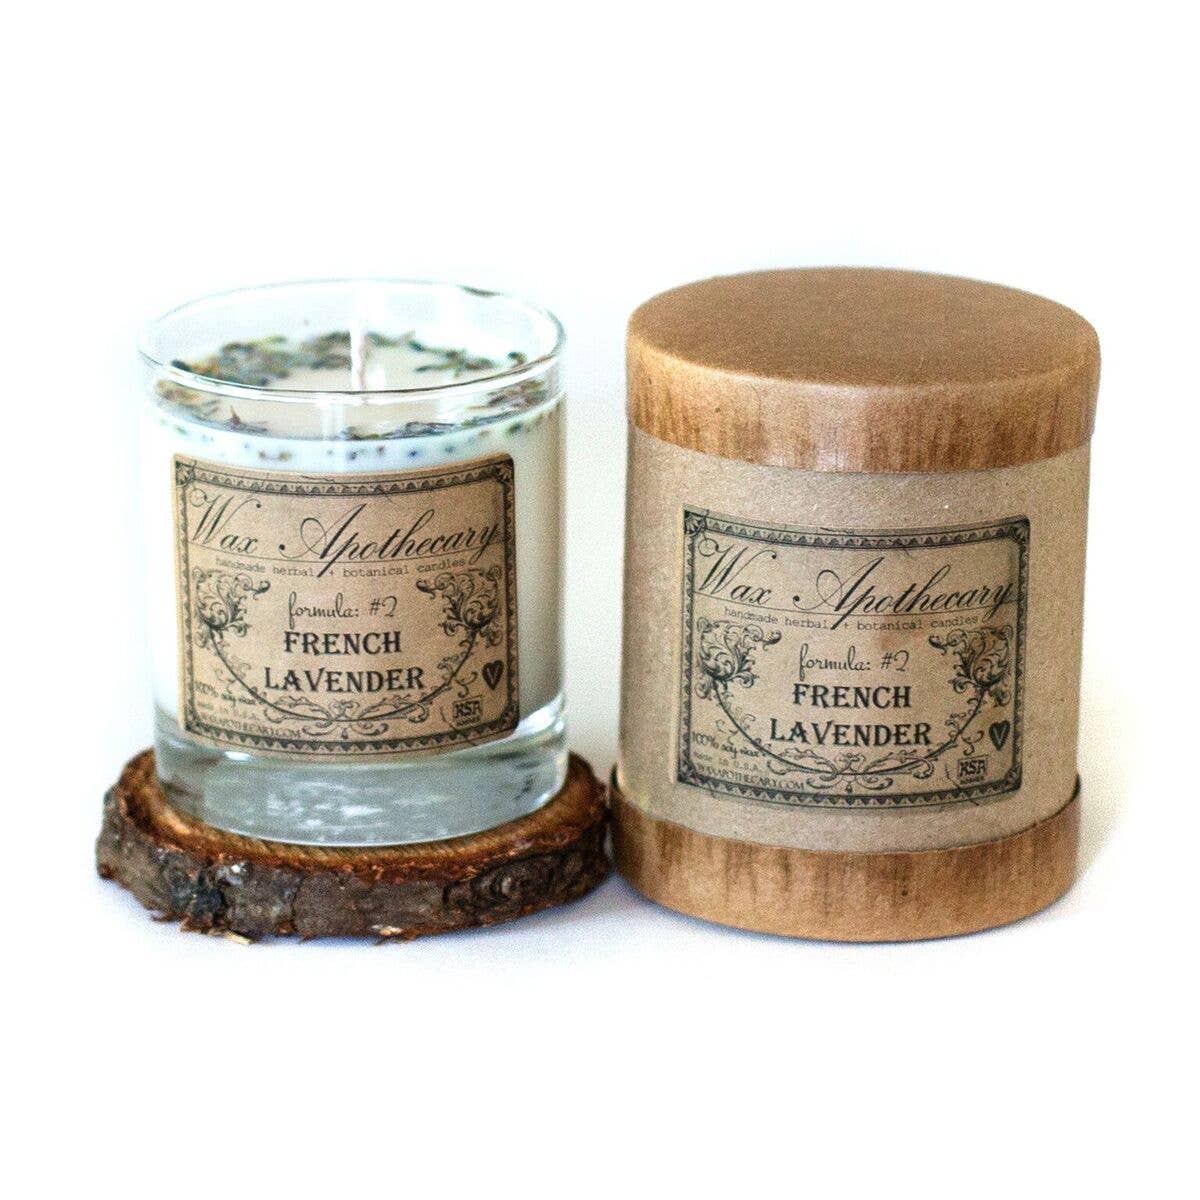 Wax Apothecary Botanical Candle  - French Lavender